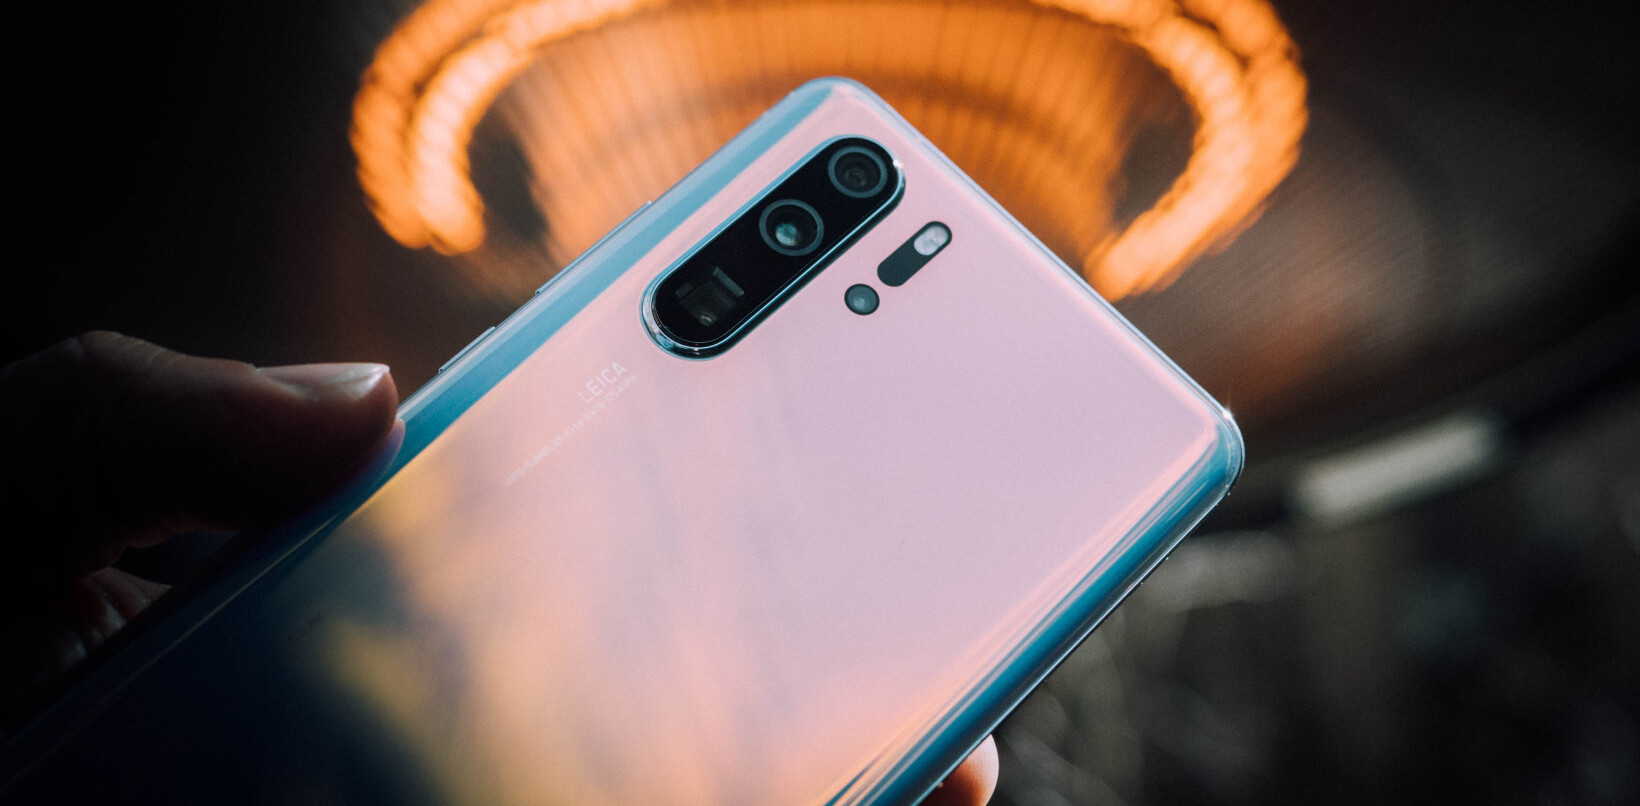 Watch Huawei’s P30 Pro (and its crazy periscope camera) get taken apart